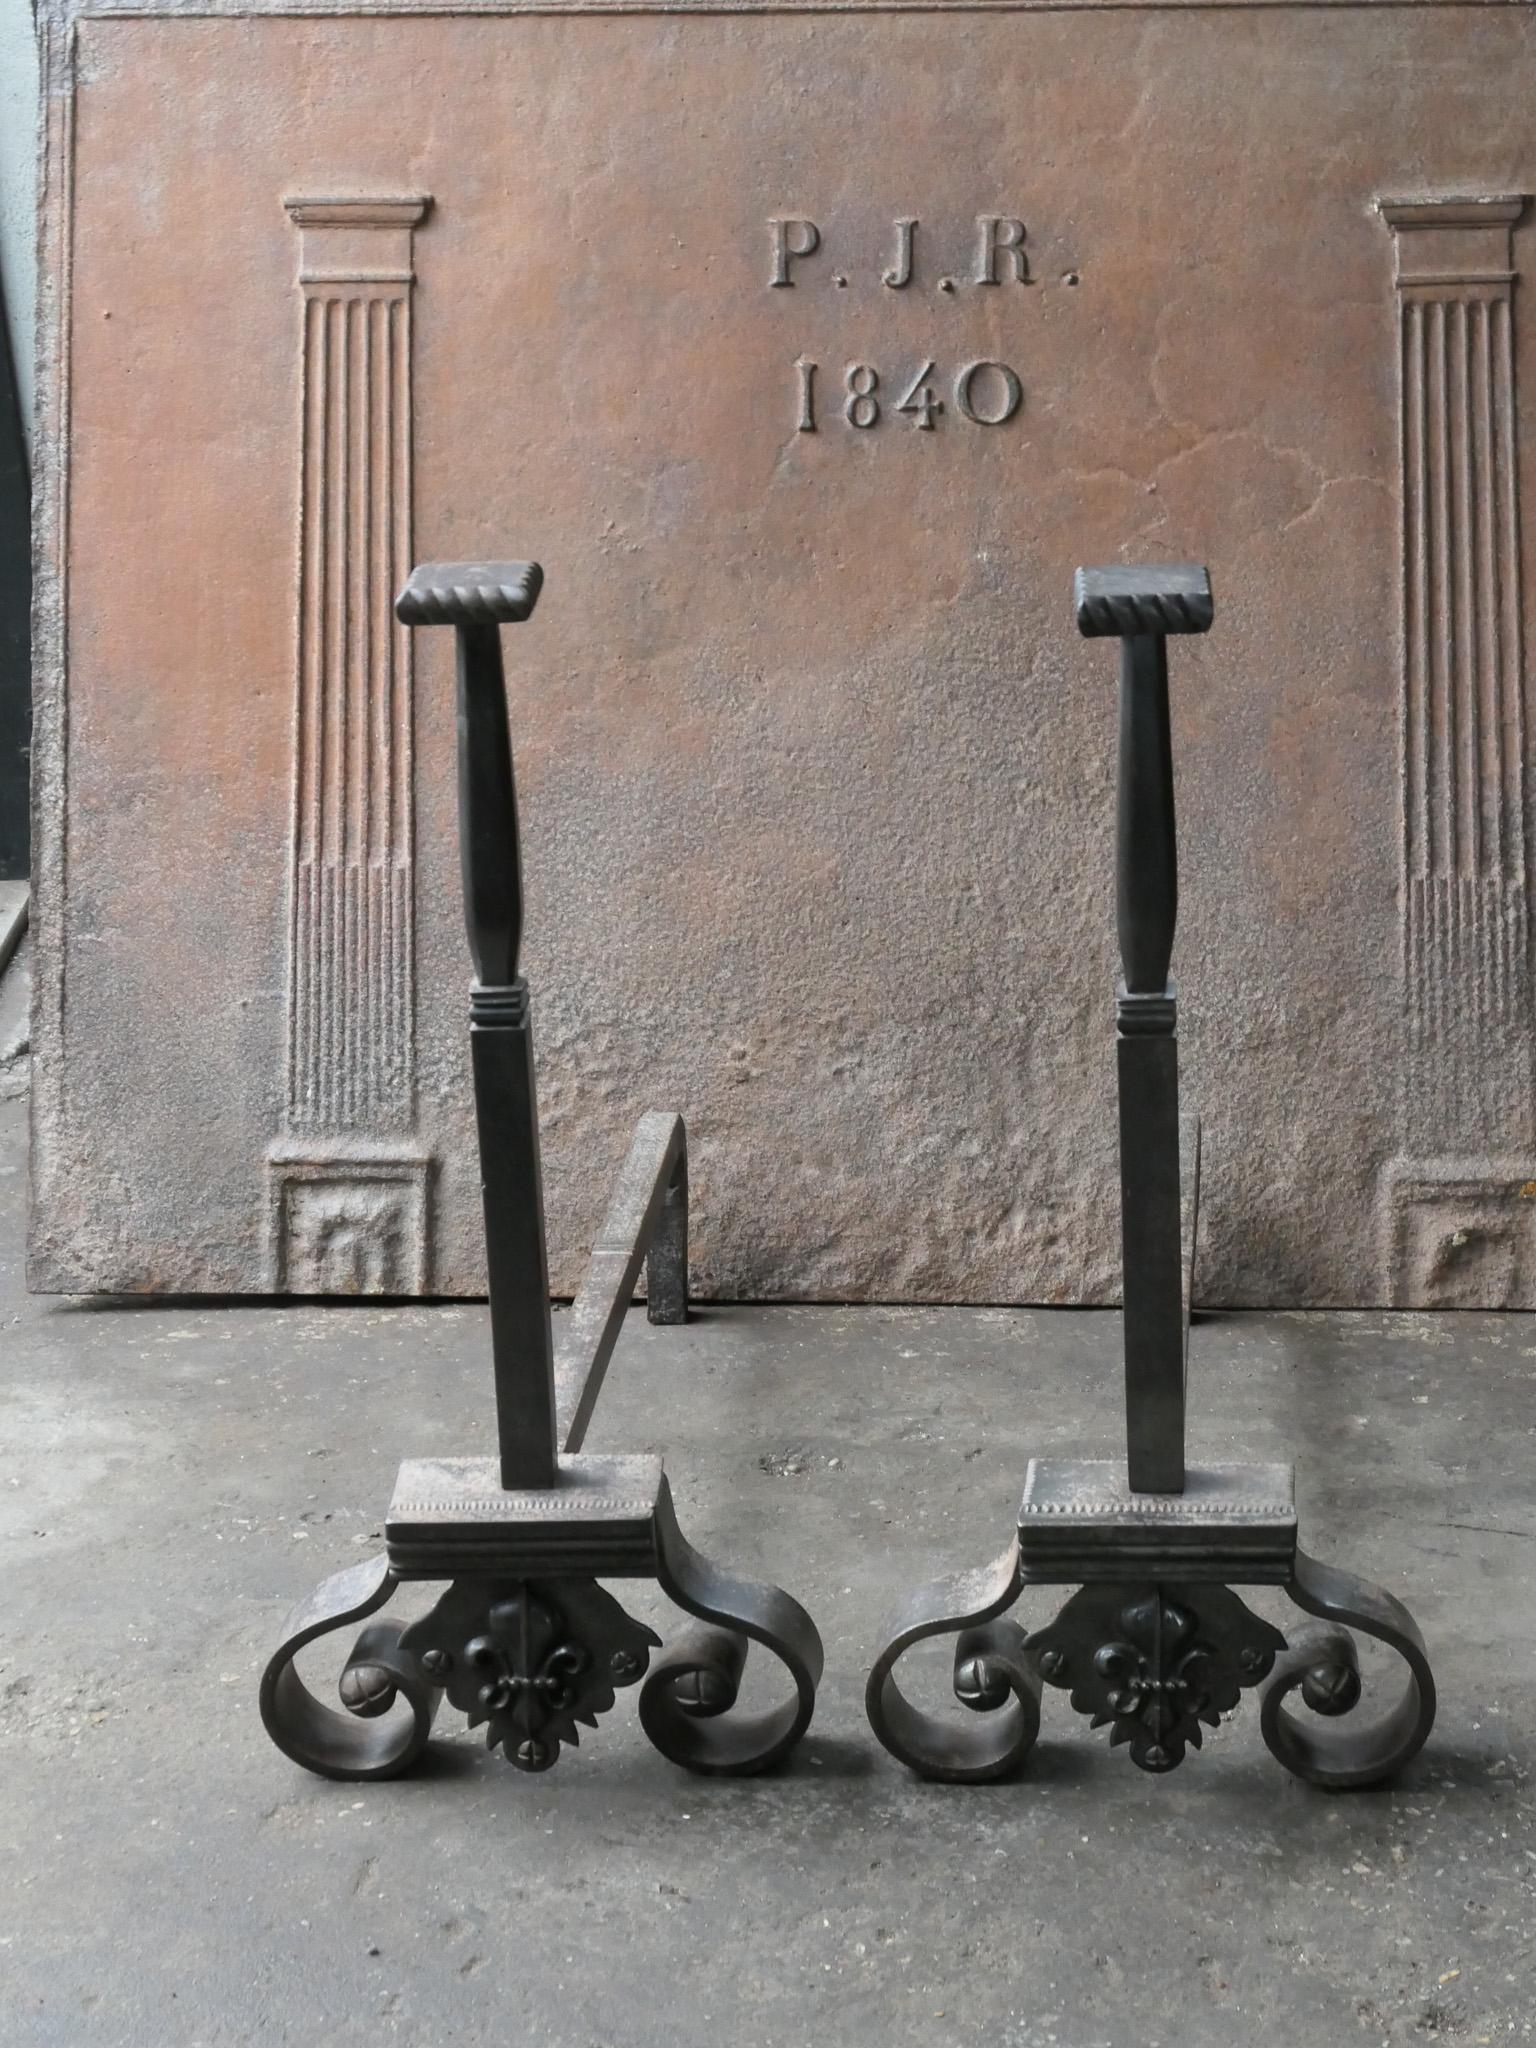 19th-20th century French Napoleon III style andirons made of wrought iron. 

The andirons are in good condition and fit for use in the fireplace.

This product has to be shipped as freight due to its size and/or (volumetric) weight. You can contact